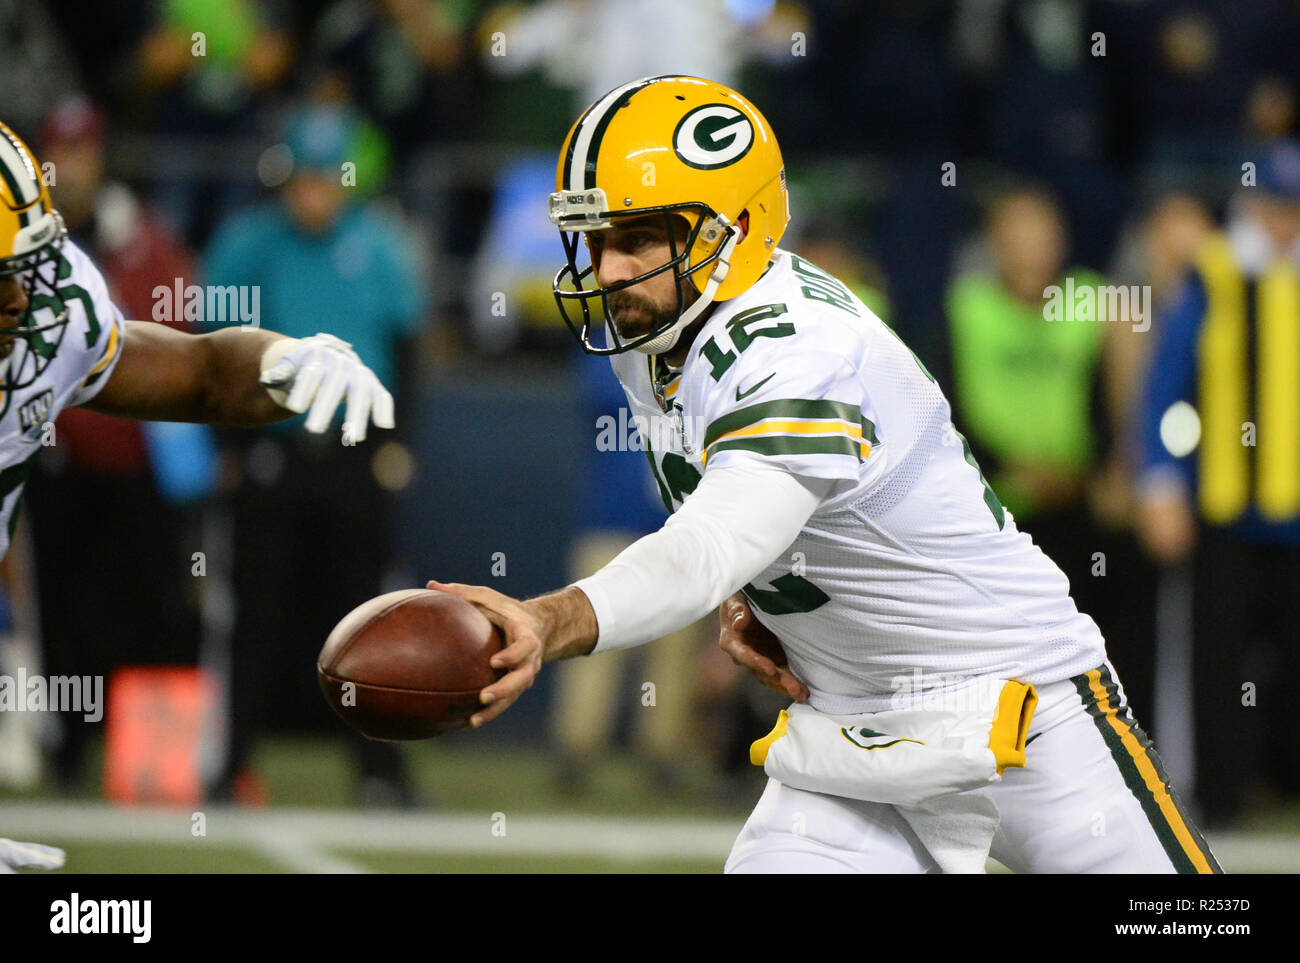 Seattle, WA, USA. 15th Nov, 2018. Green Bay Packers quarterback Aaron  Rodgers (12) in the pocket in his color rush uniform during a game between  the Green Bay Packers and Seattle Seahawks